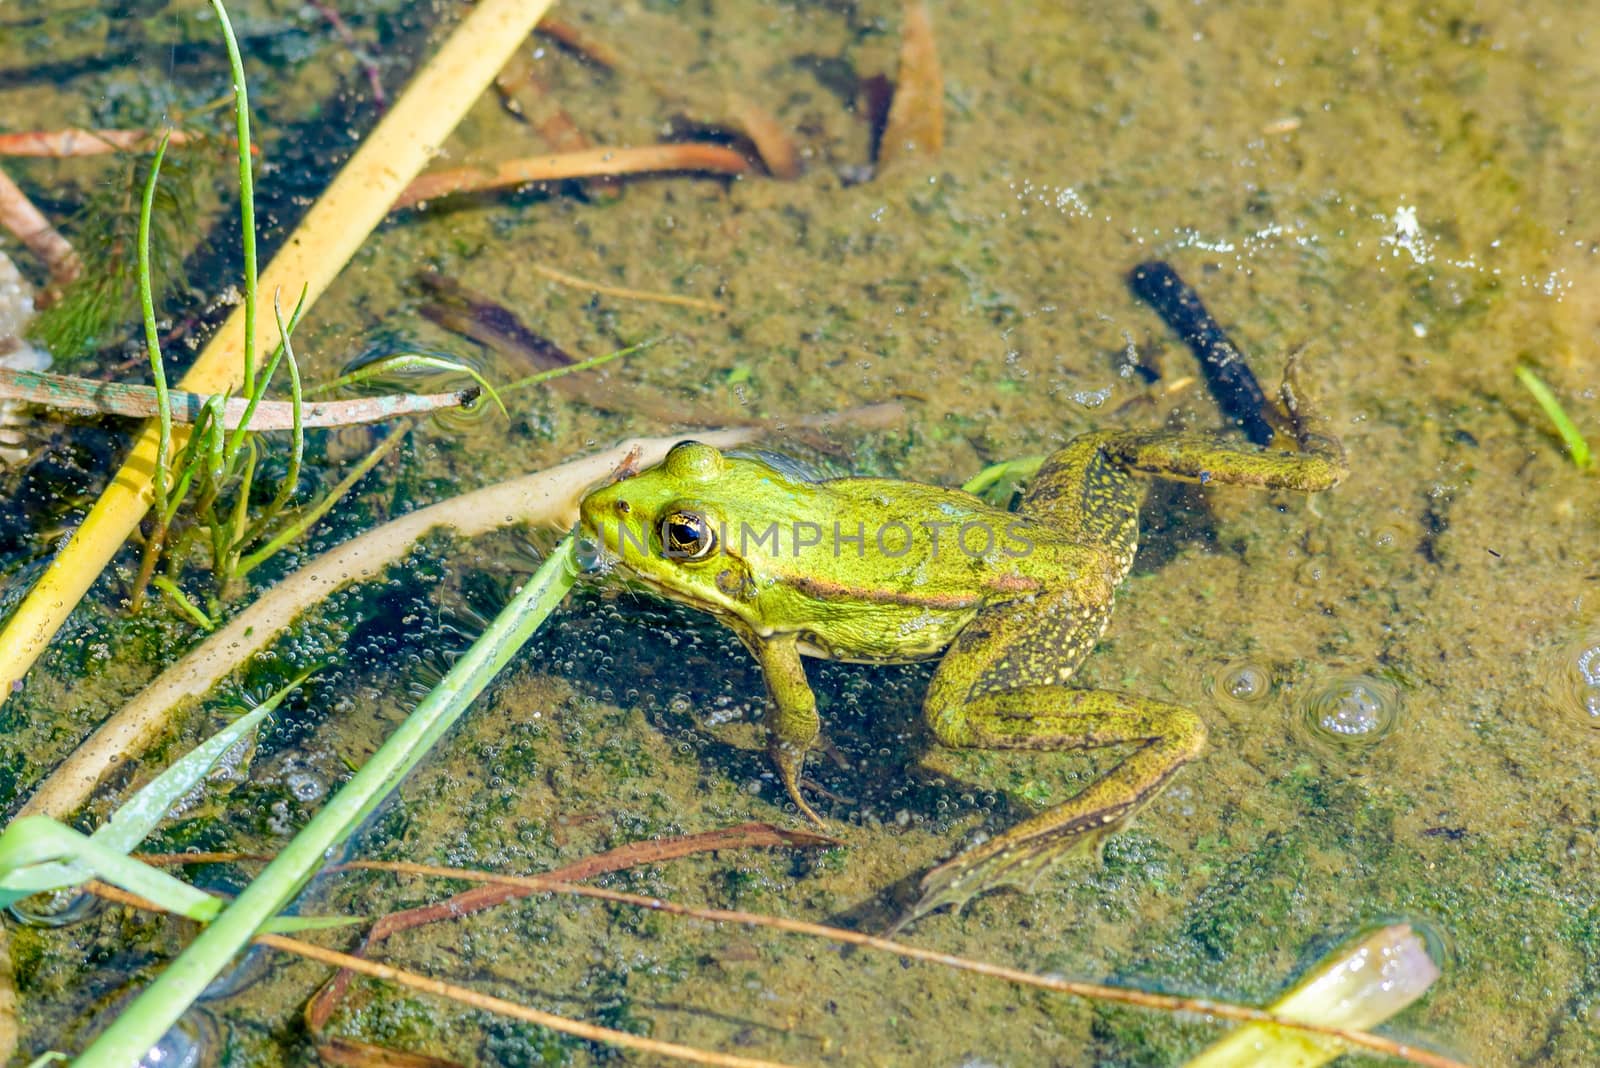 Green Frog in the River by MaxalTamor